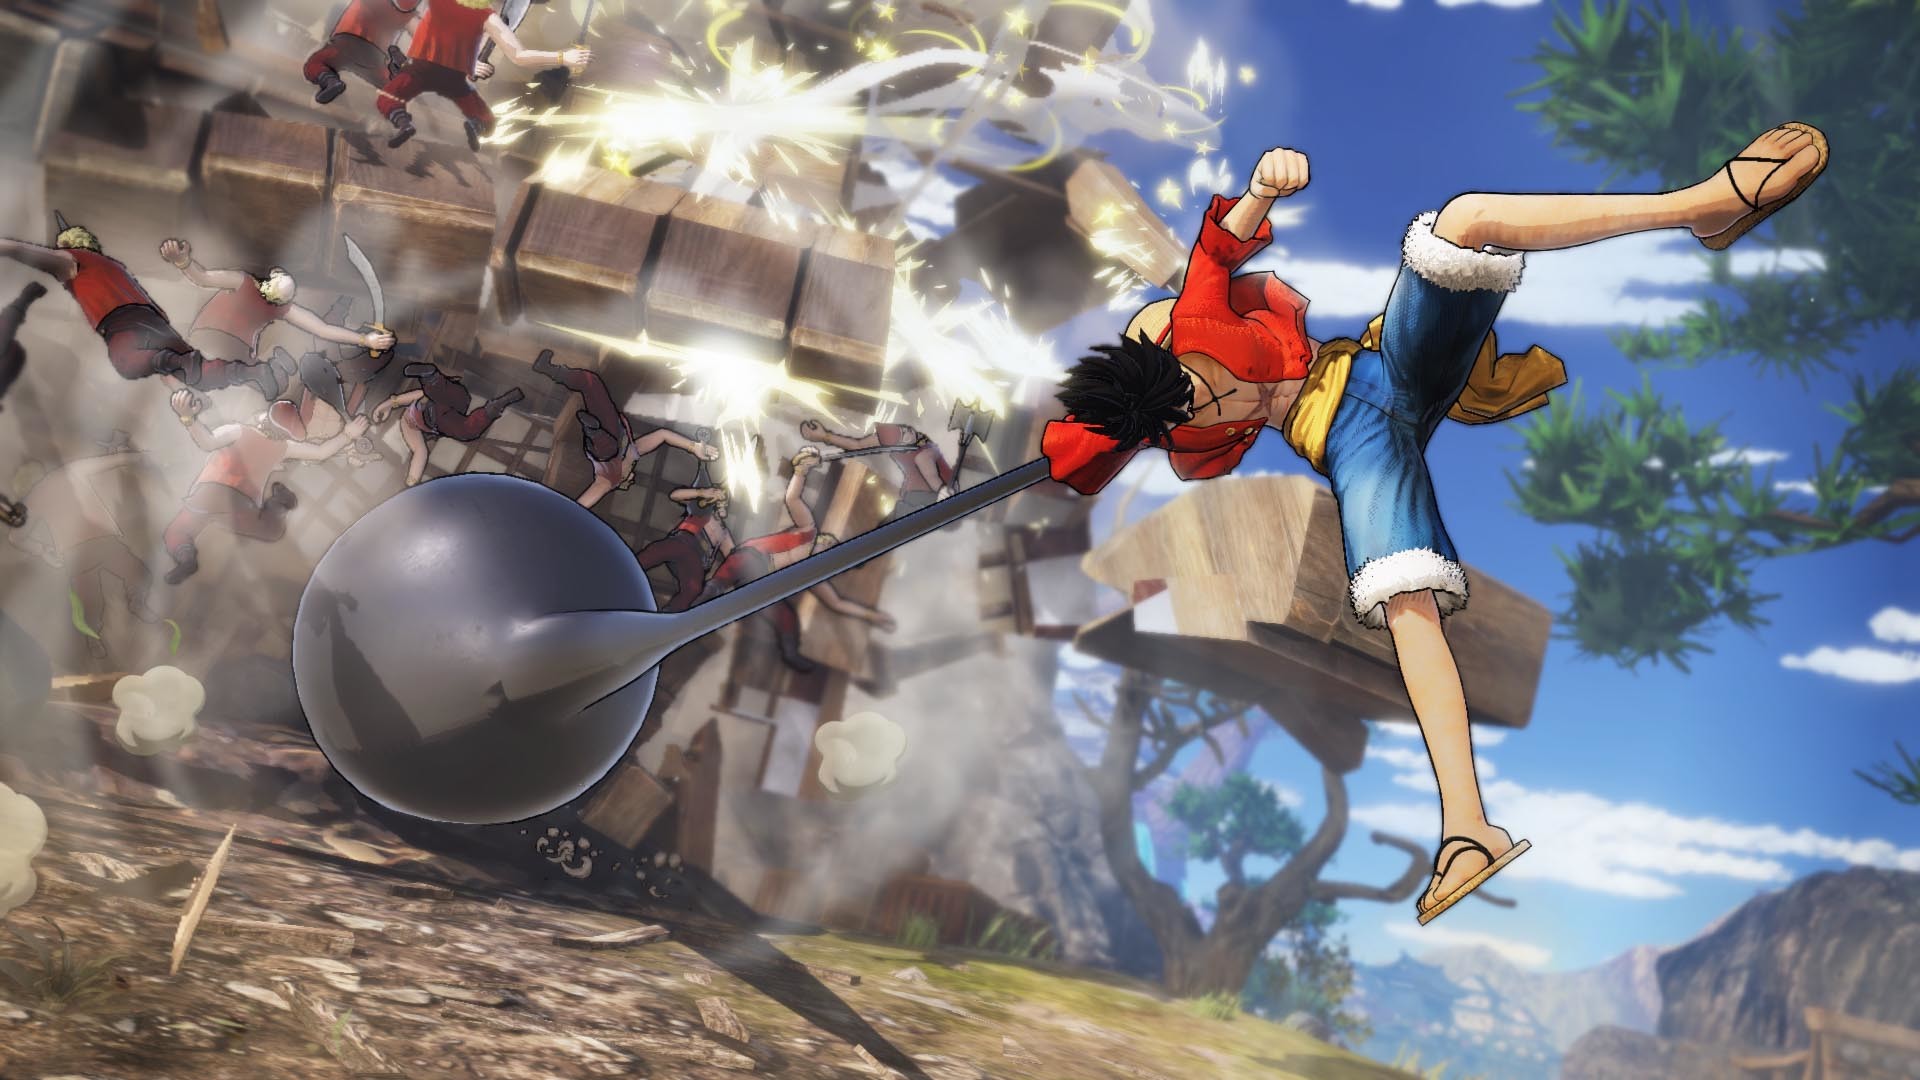 Save 85% on ONE PIECE: PIRATE WARRIORS 4 on Steam